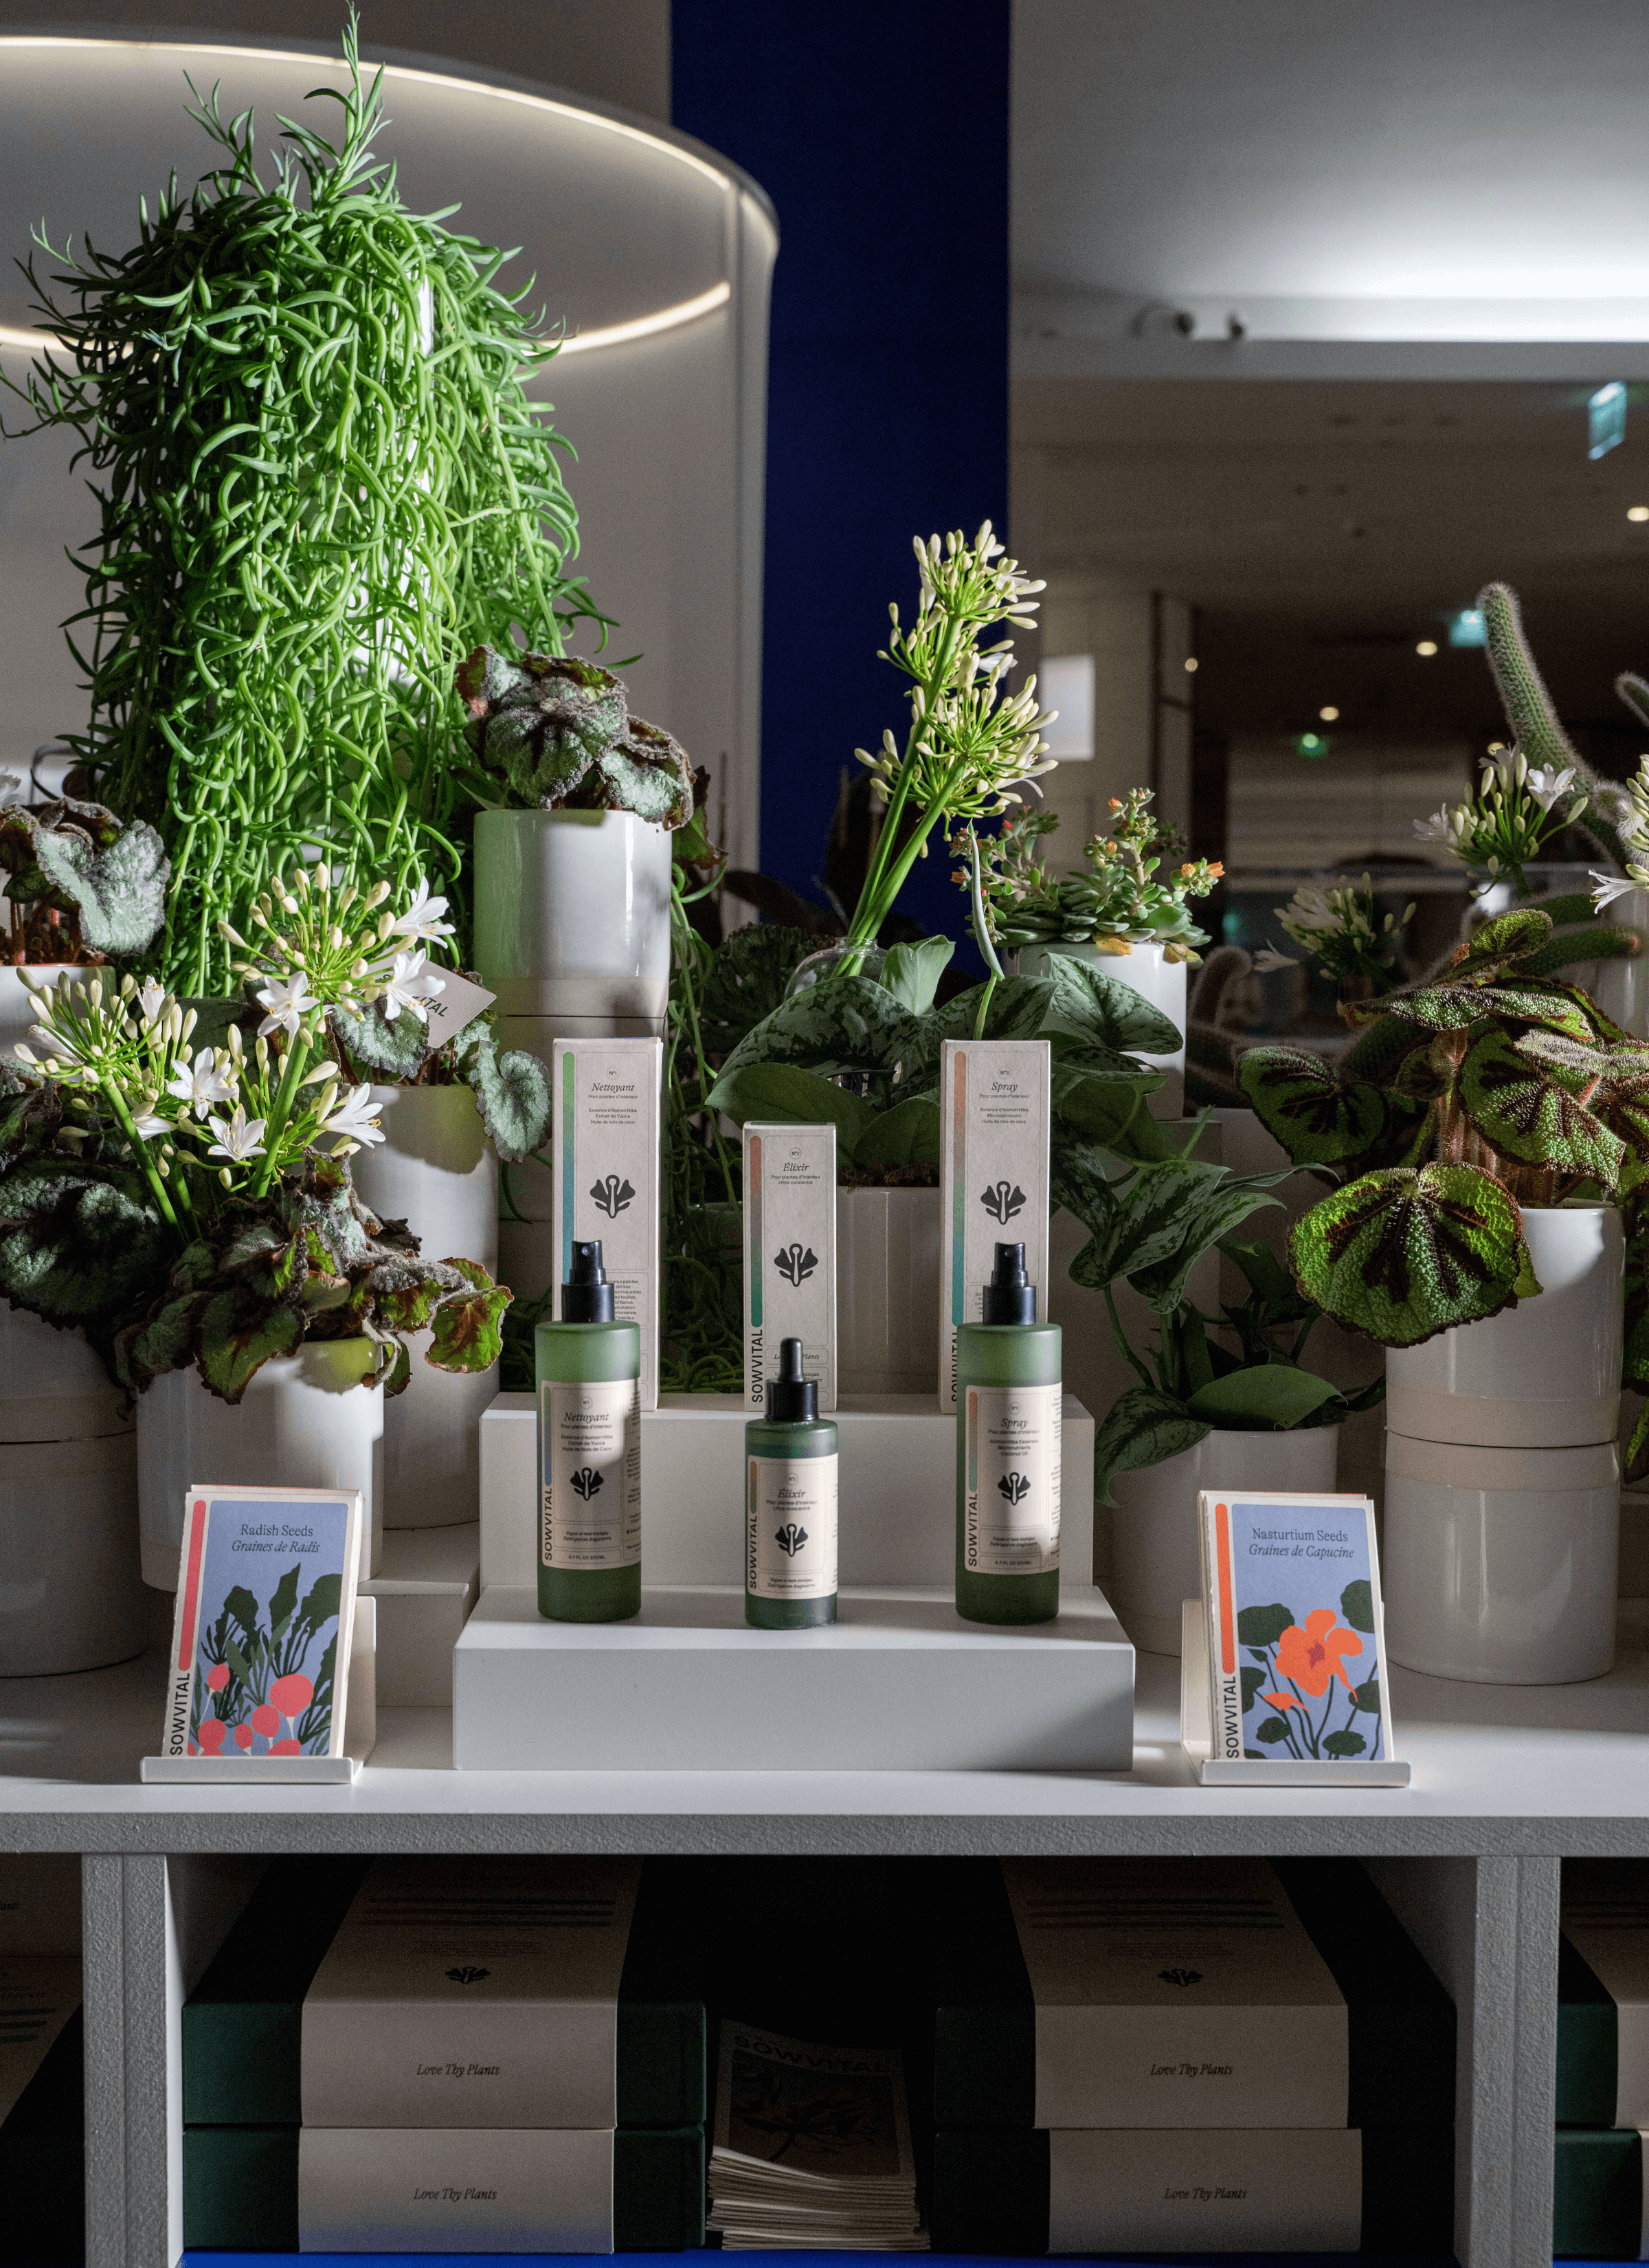 Sowvital's three-step plant care routine is tastefully displayed on the surface, with the packaging neatly arranged. Behind the products, radish and nasturtium seeds packets add a touch of variety and possibility. In the background, a lush assortment of potted plants and flowers serves as decorative accents, enhancing the natural theme of the display. Beneath the surface, the three-step gift set is conveniently stocked, ensuring easy access for customers.